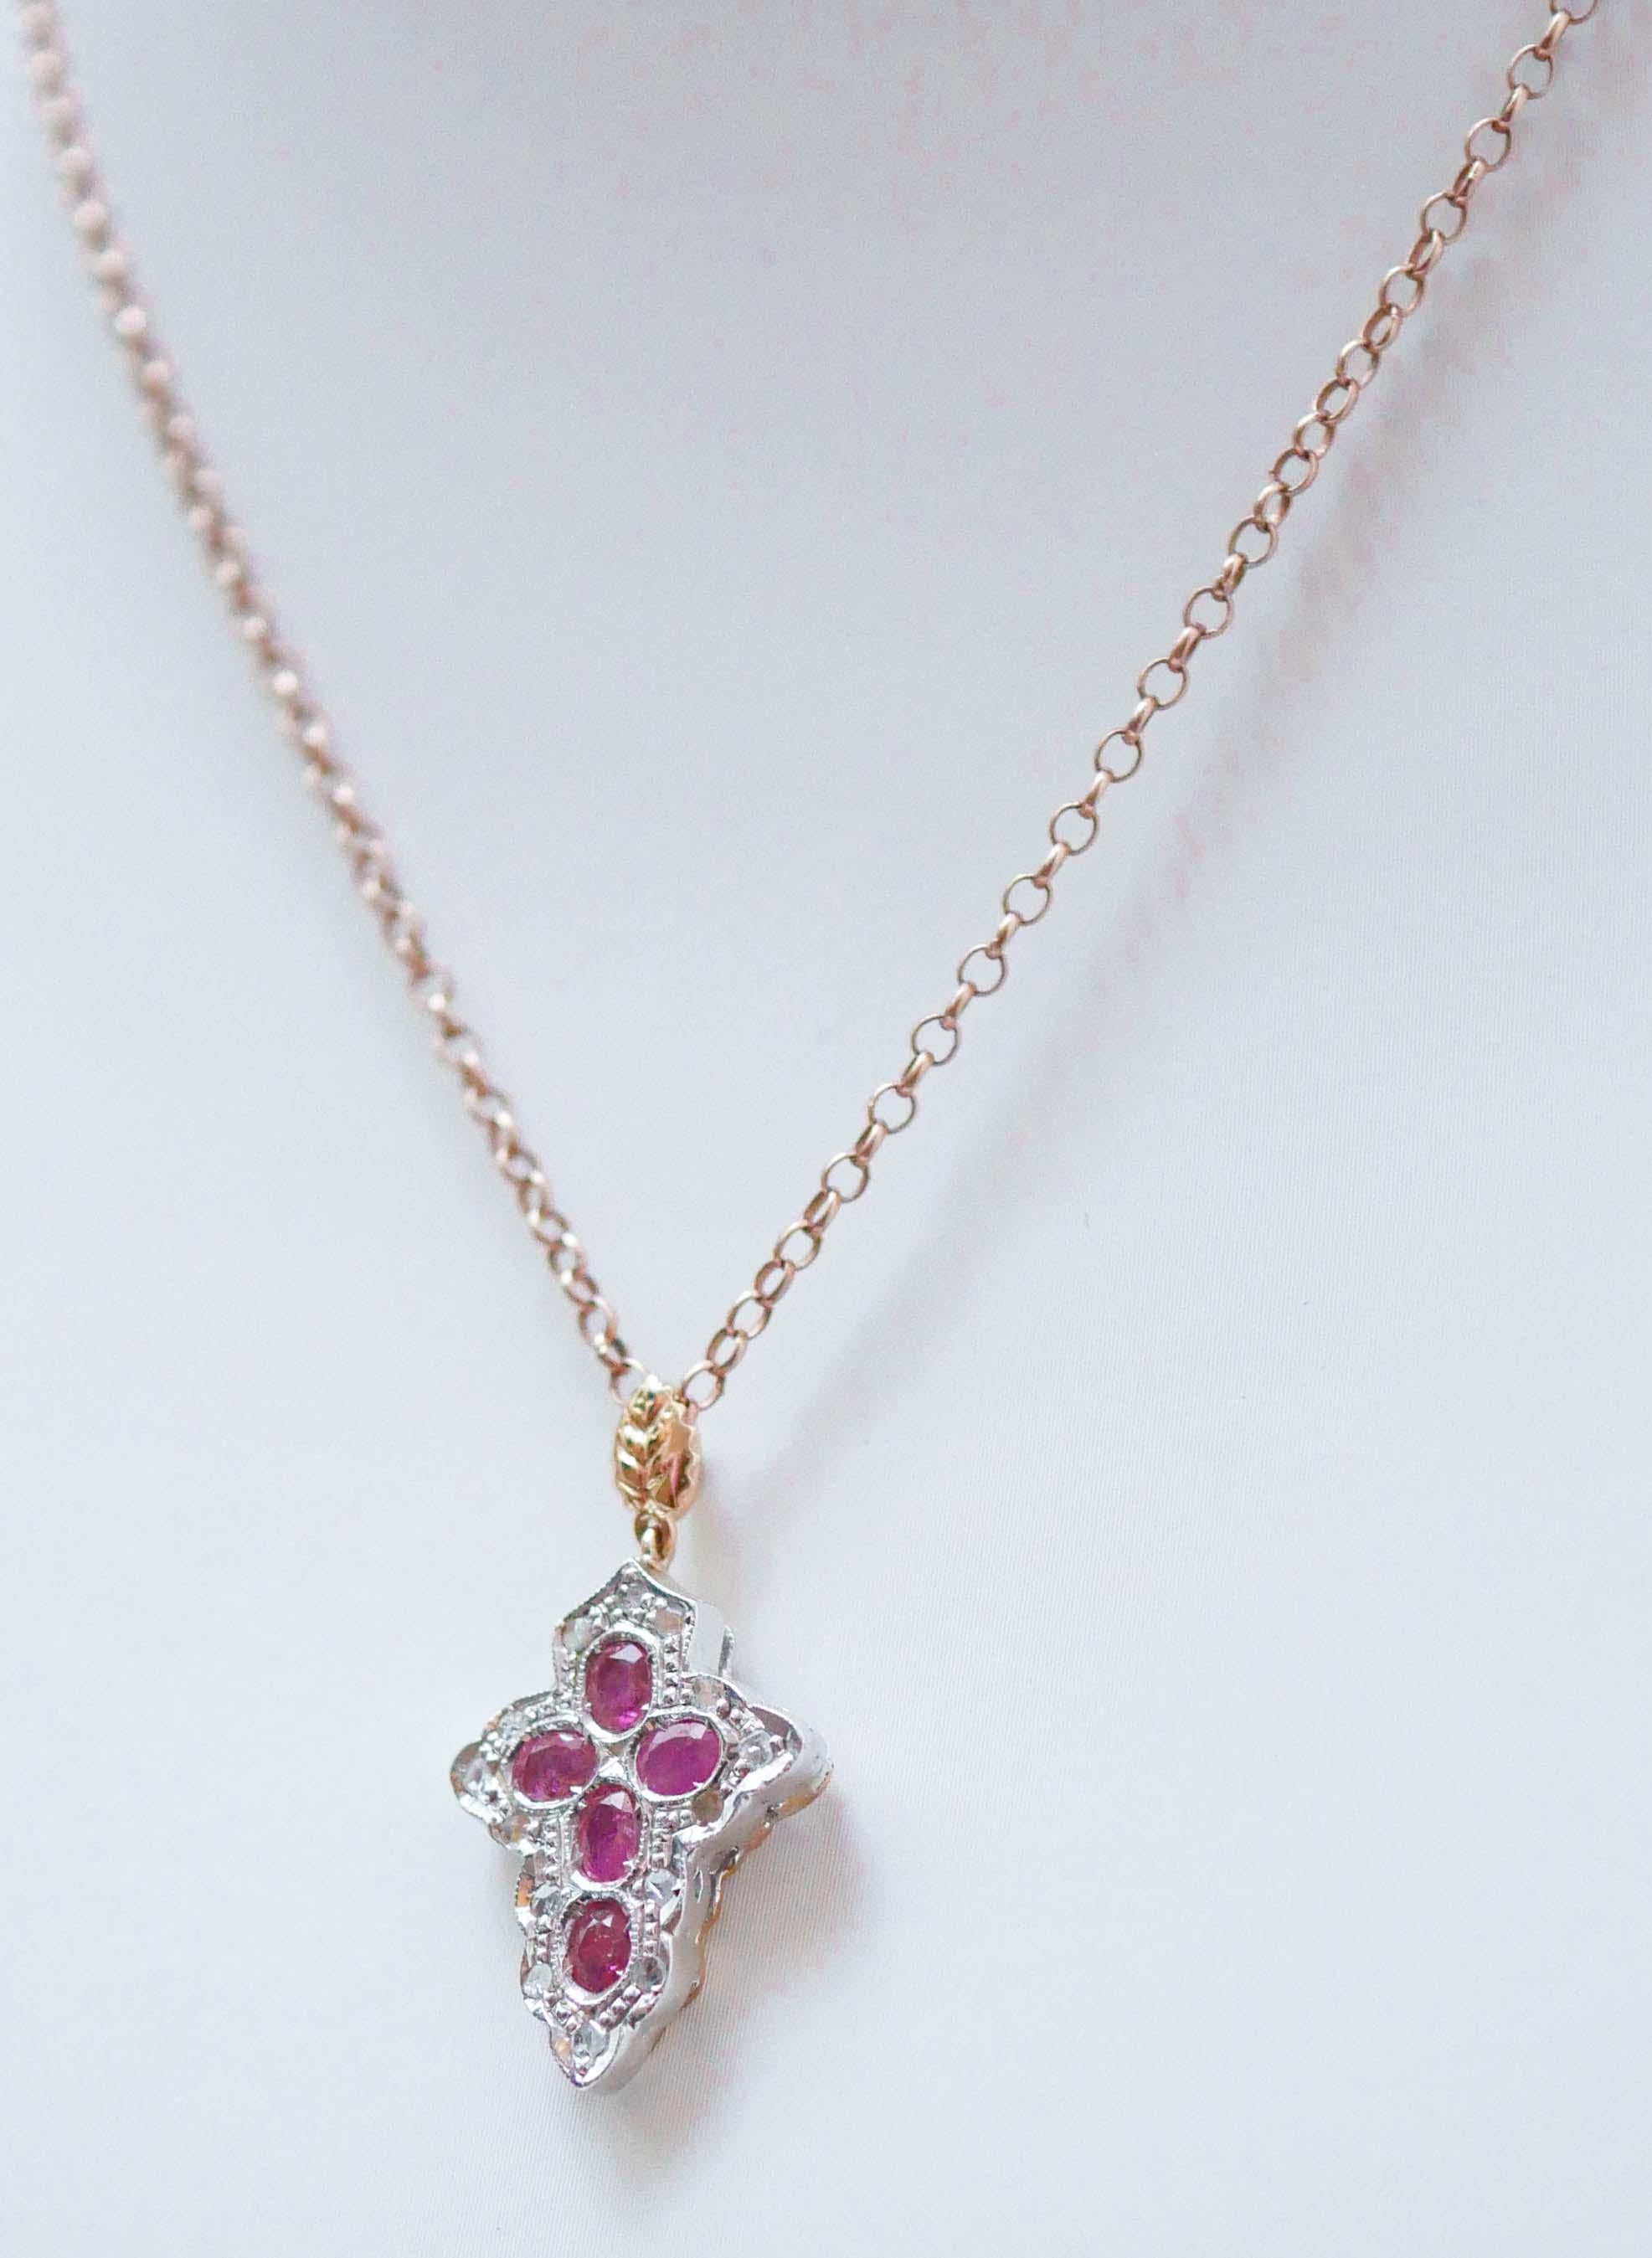 Retro Rubies, Diamonds, Rose Gold and Silver Cross Pendant. For Sale